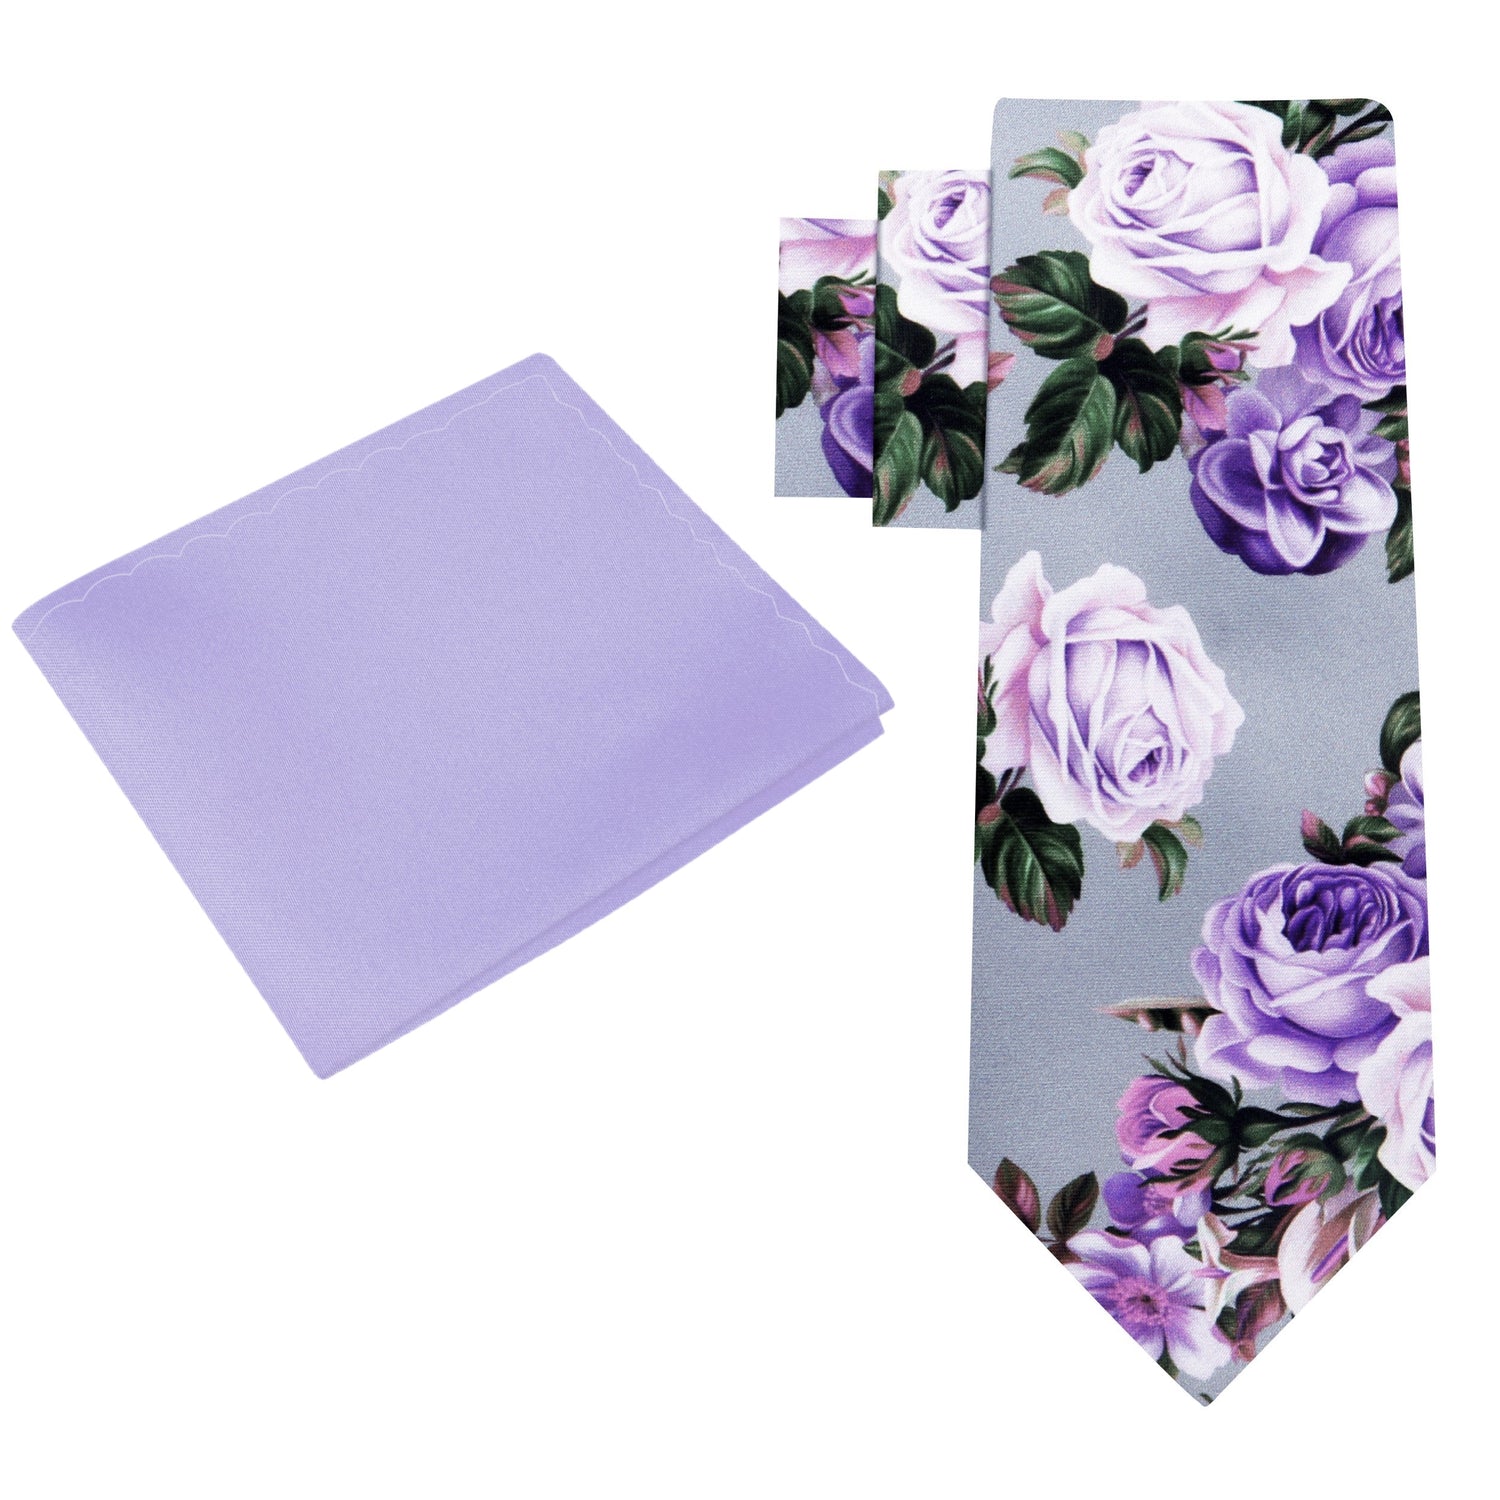 Alt View: Grey, Pink, Purple and Green Floral Necktie with Light Purple Square